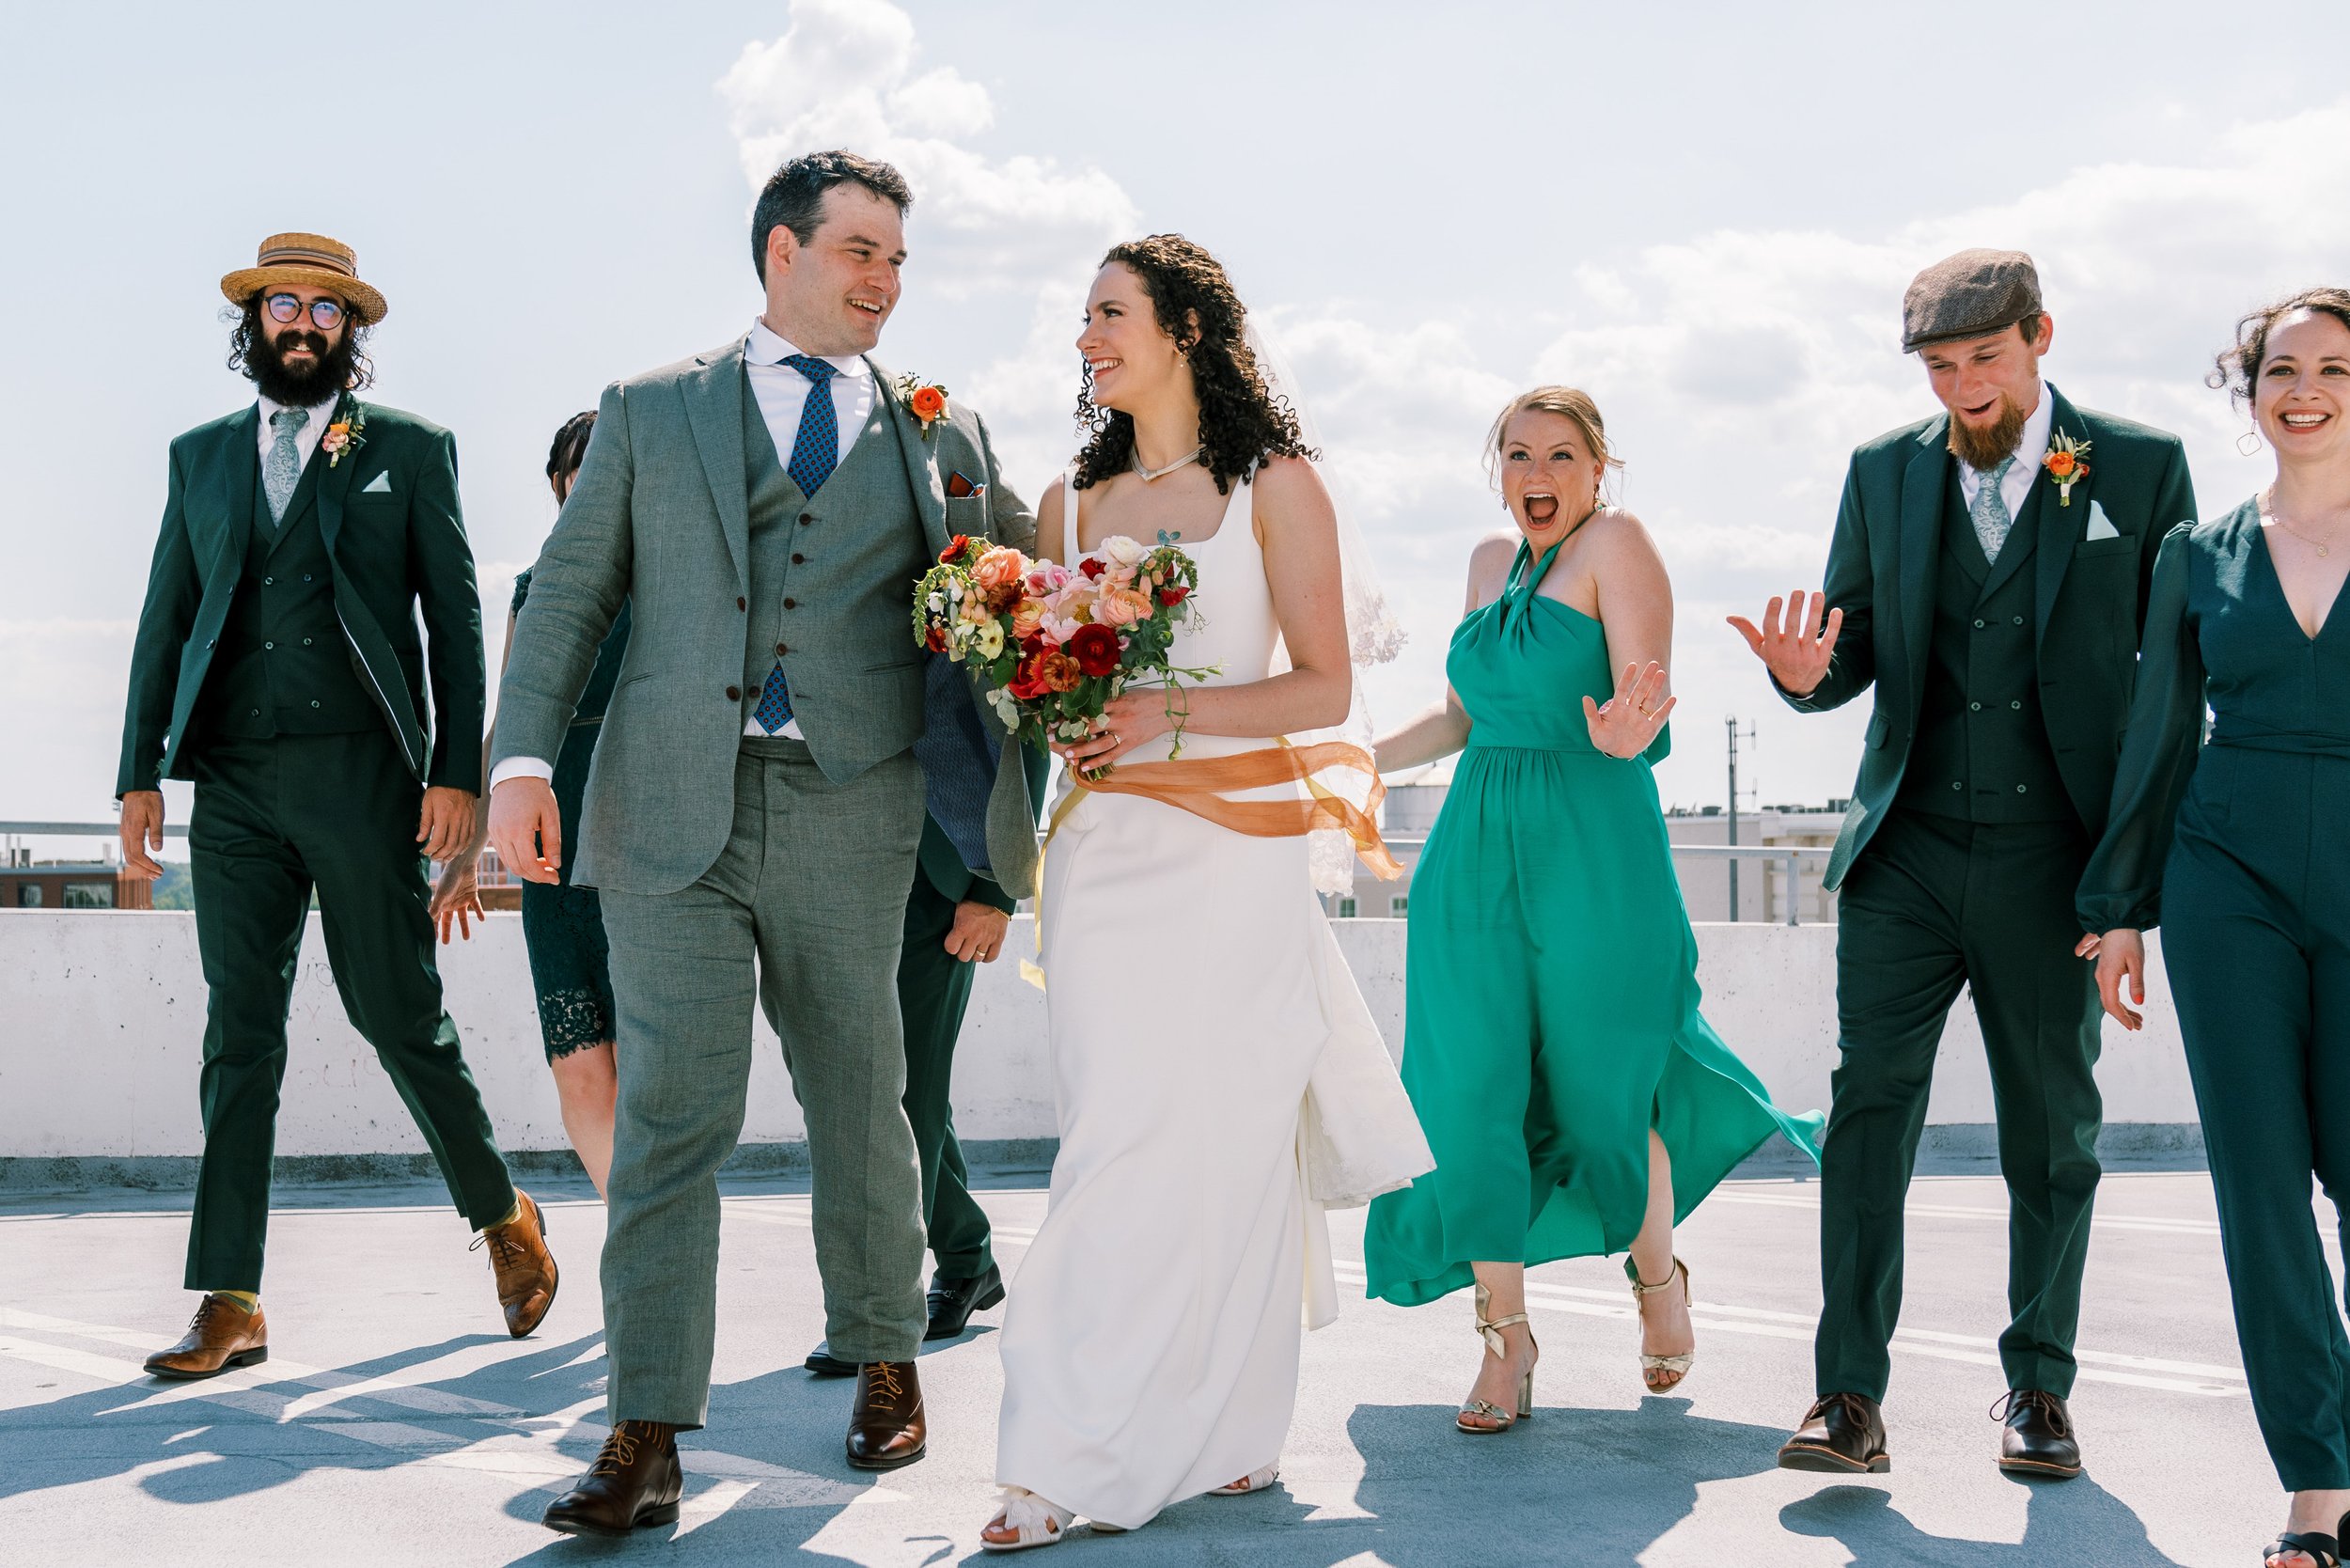 Walking Green Wedding Party 21c Museum Hotel Durham Wedding Fancy This Photography